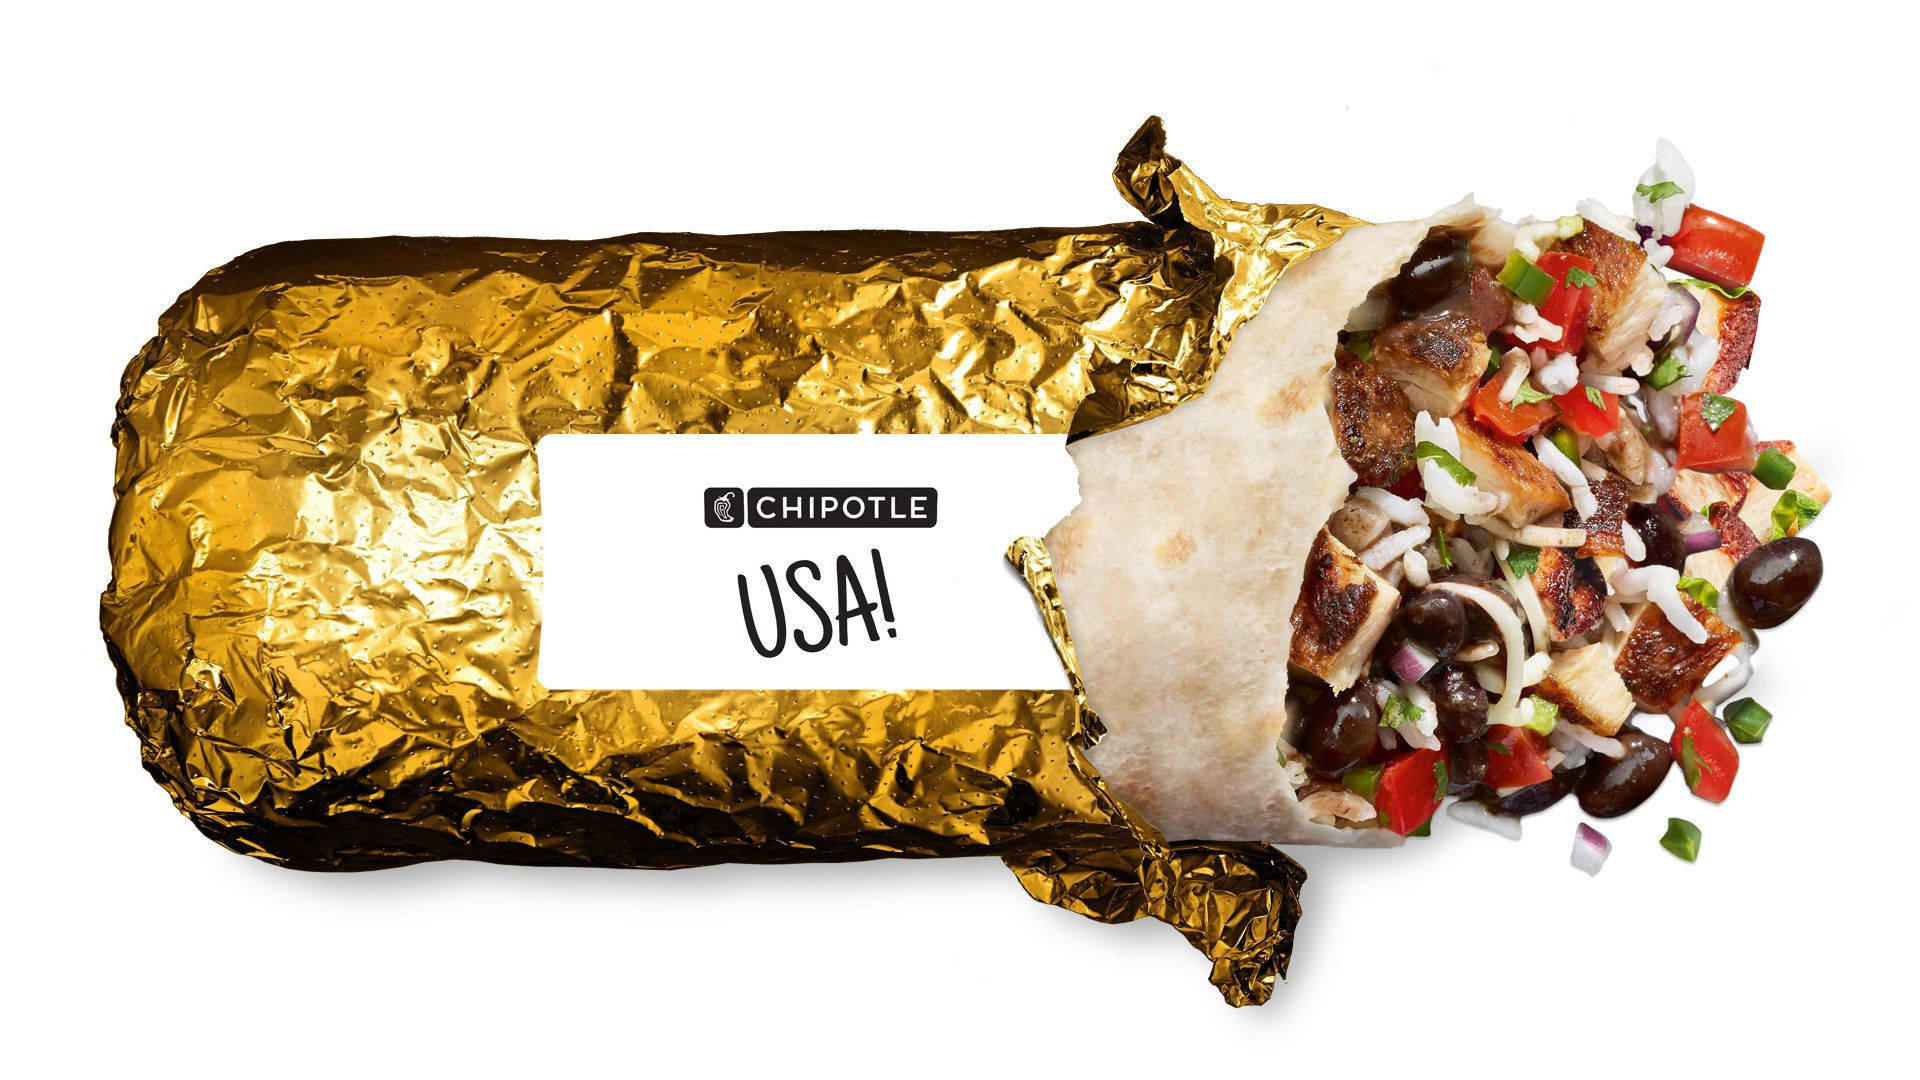 Caption: Gold Foil Wrapped Burrito Shimmering With Quality Background